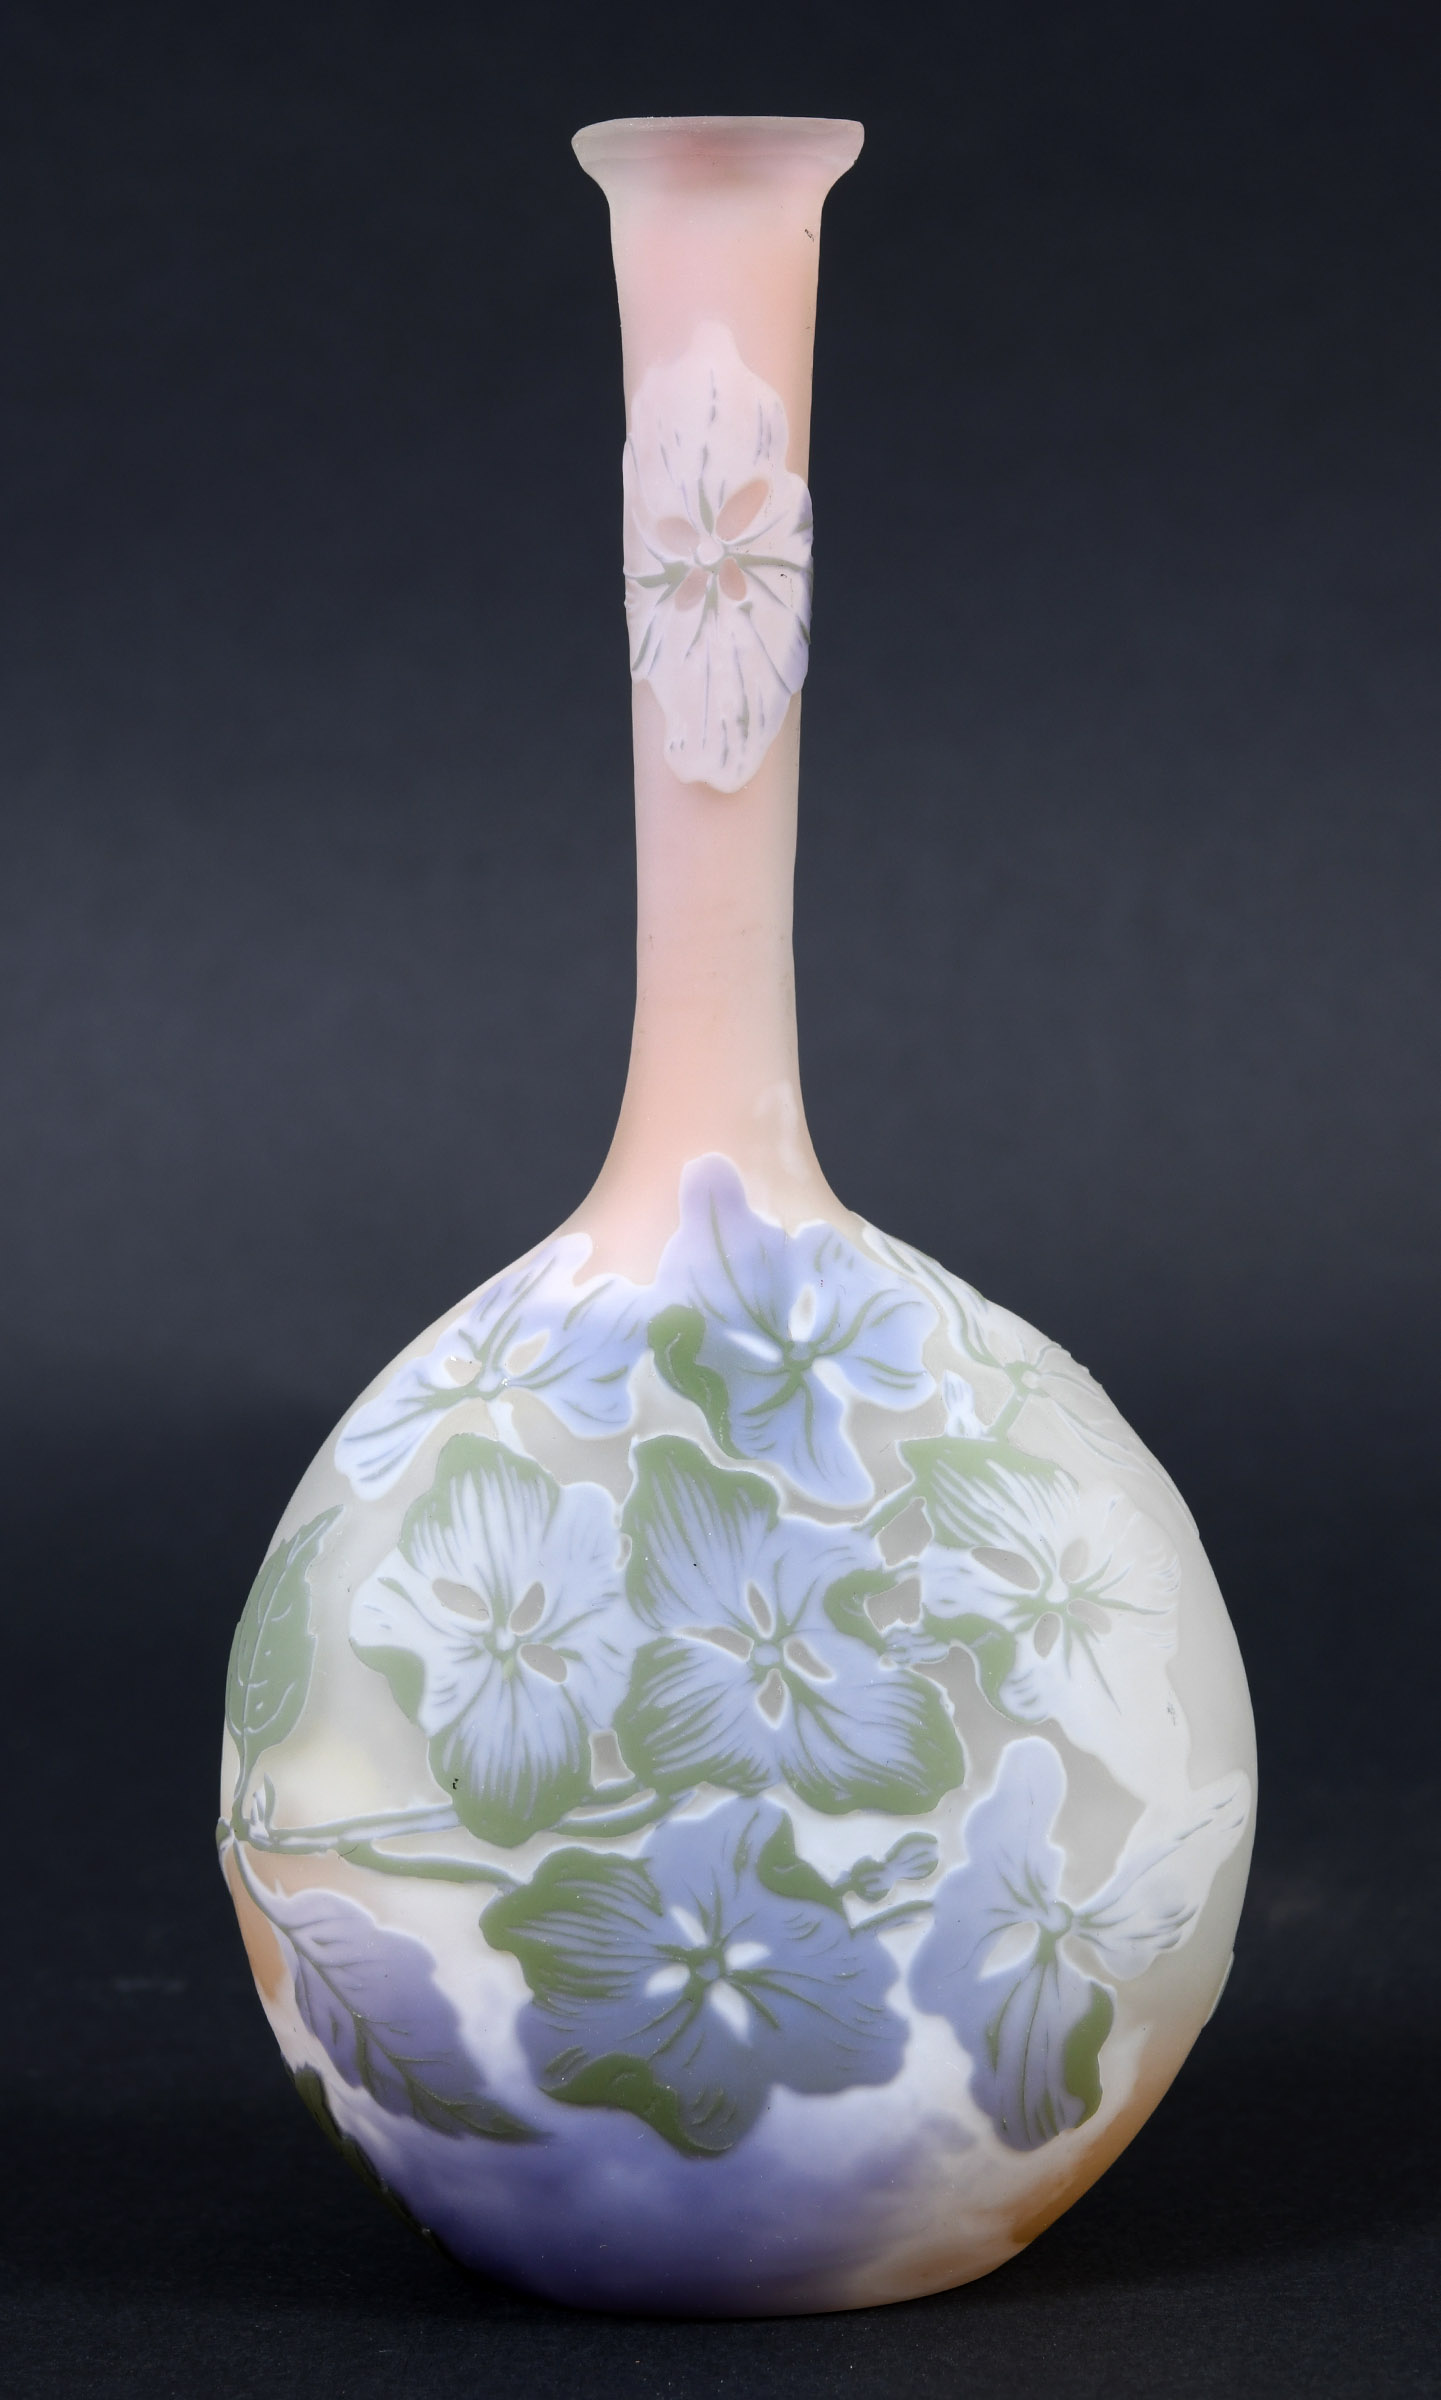 GALLE CAMEO GLASS VASE a small bottled shaped vase with a flattened circular body and slender